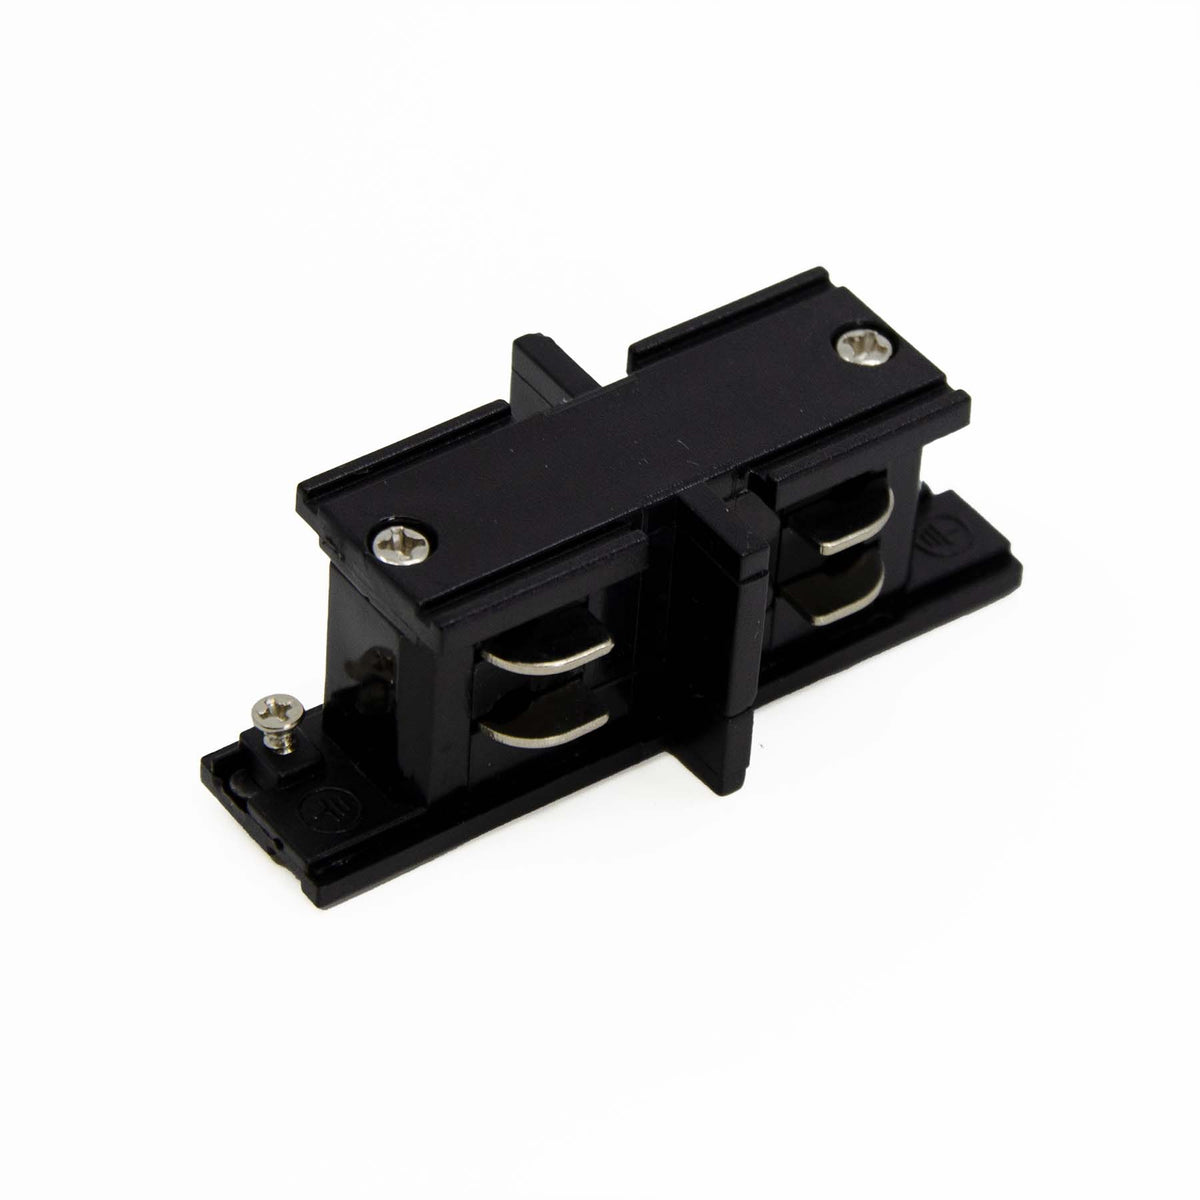 G.W.S LED Wholesale Ltd. 3 Circuits / Black Straight Connector For LED Track Light